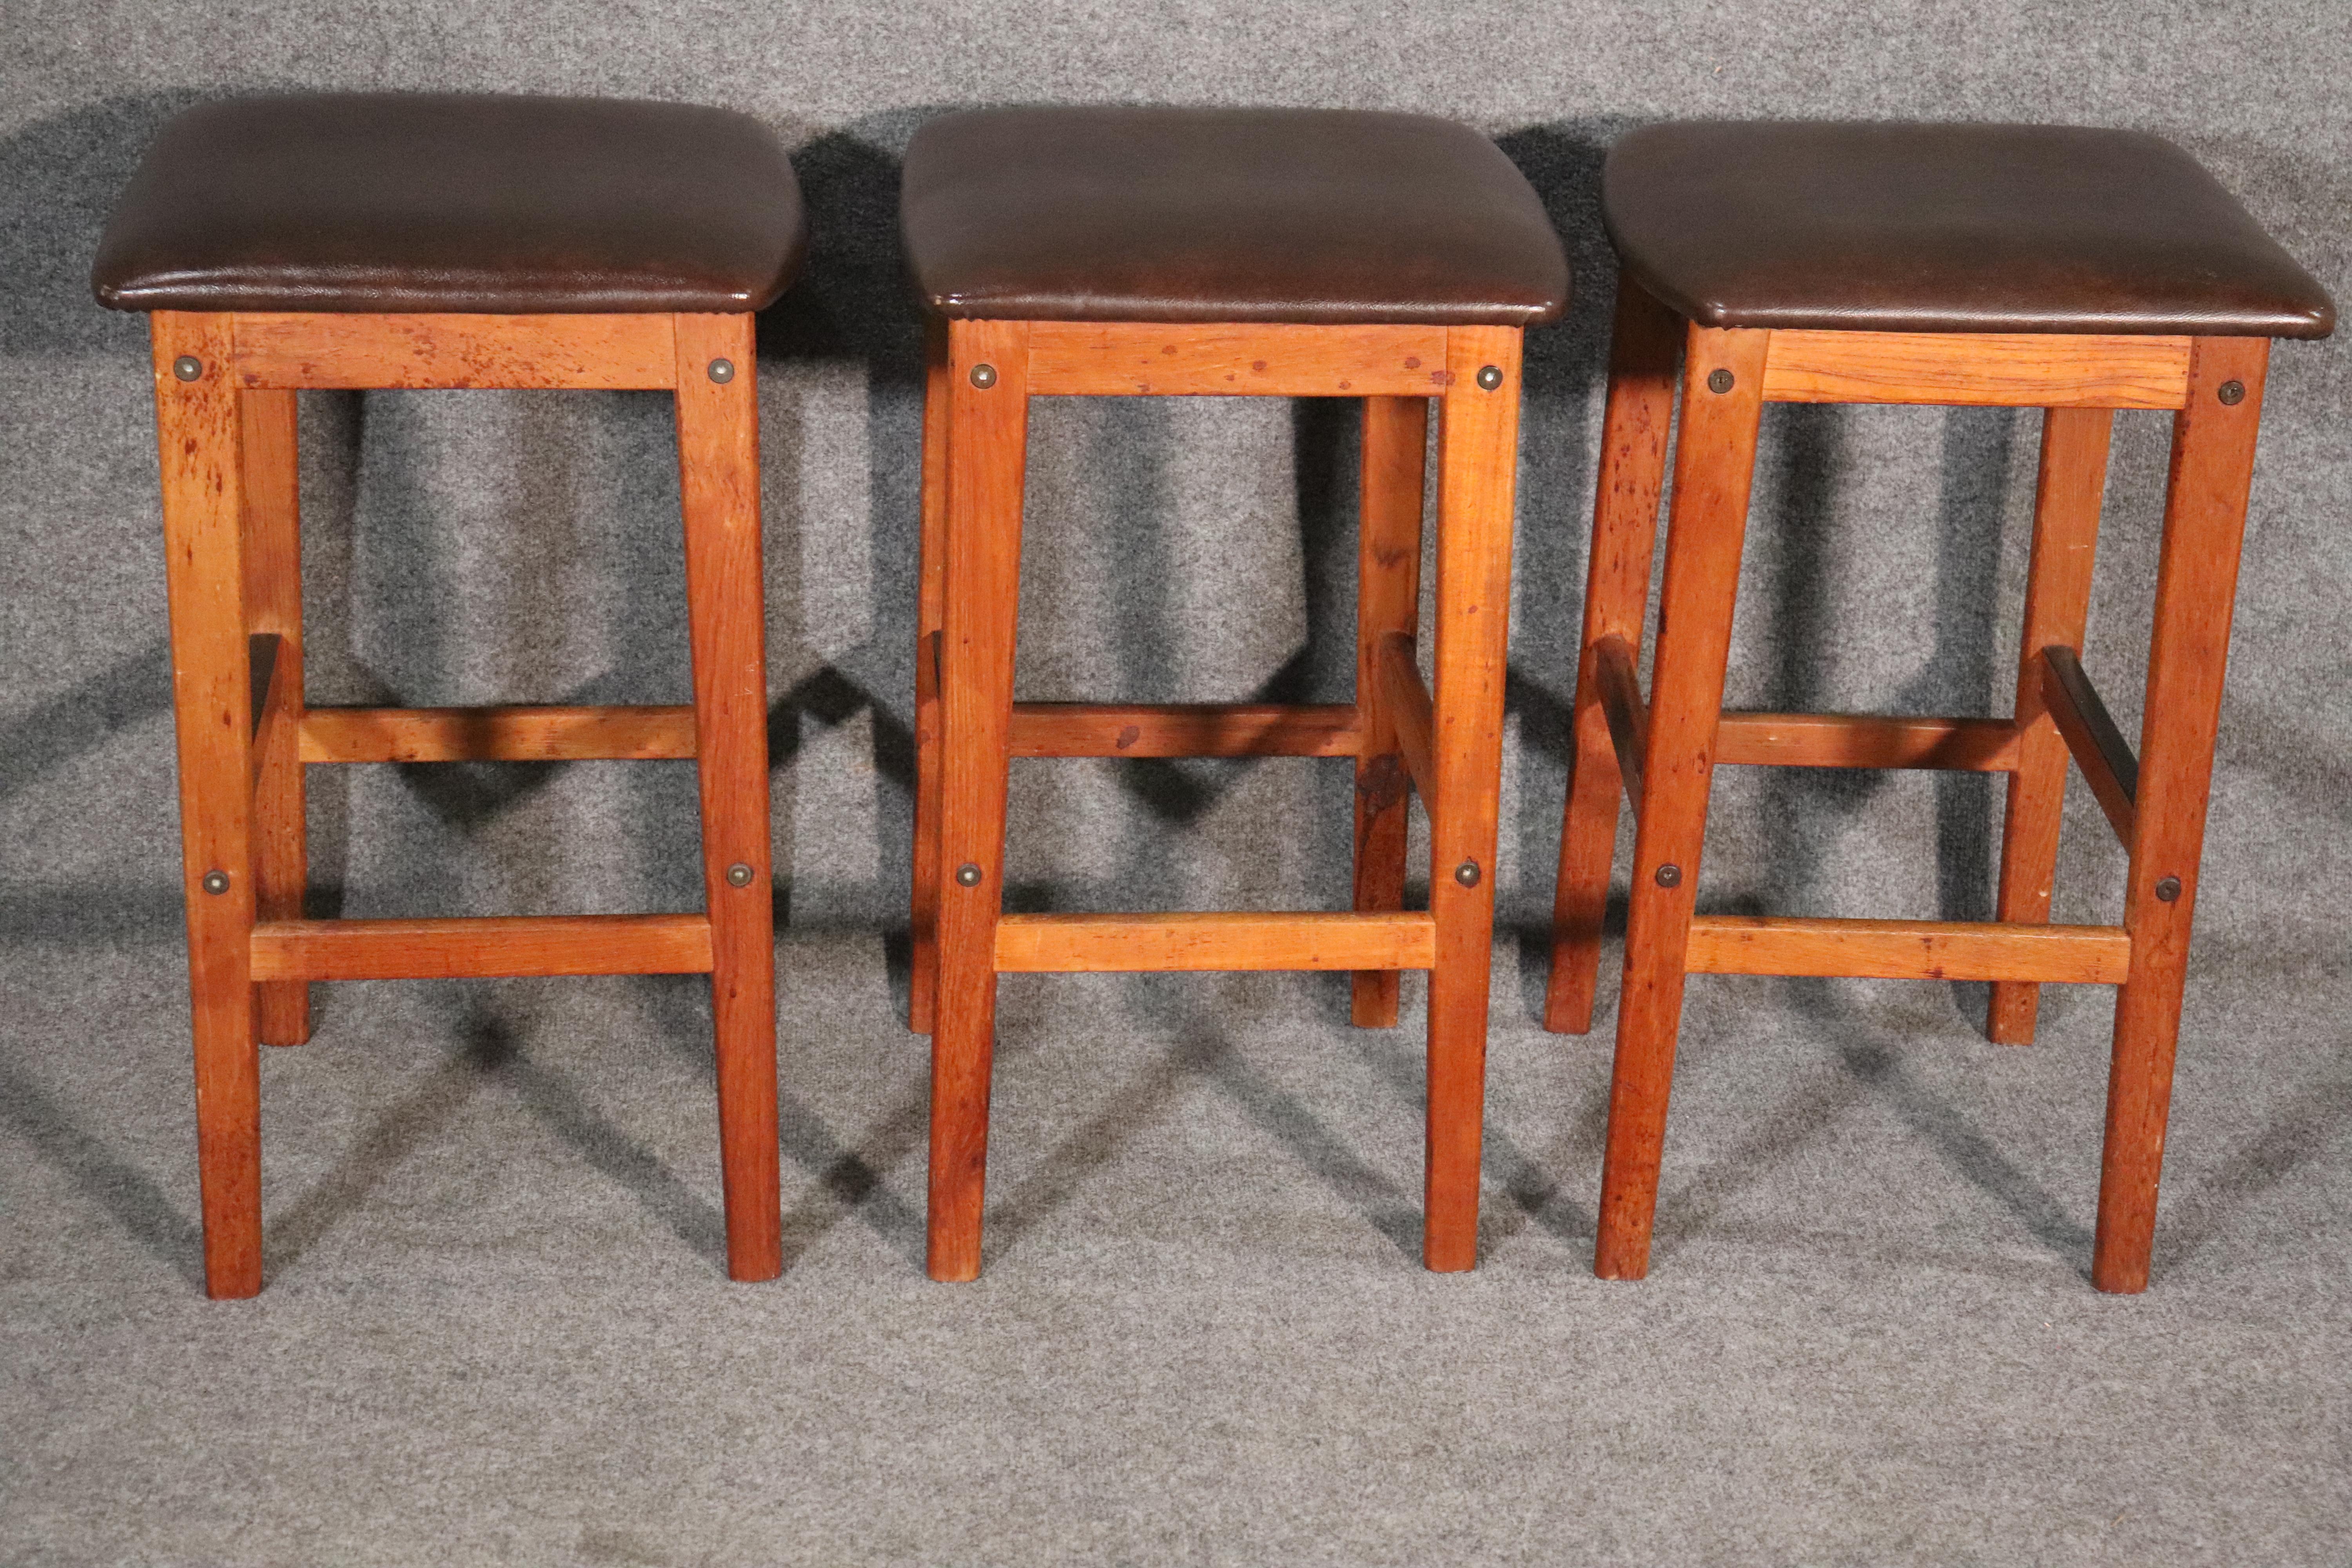 Set of three mid-century stools with teak frames and leather style cushions. Counter height with footrests.
Please confirm location NY or NJ